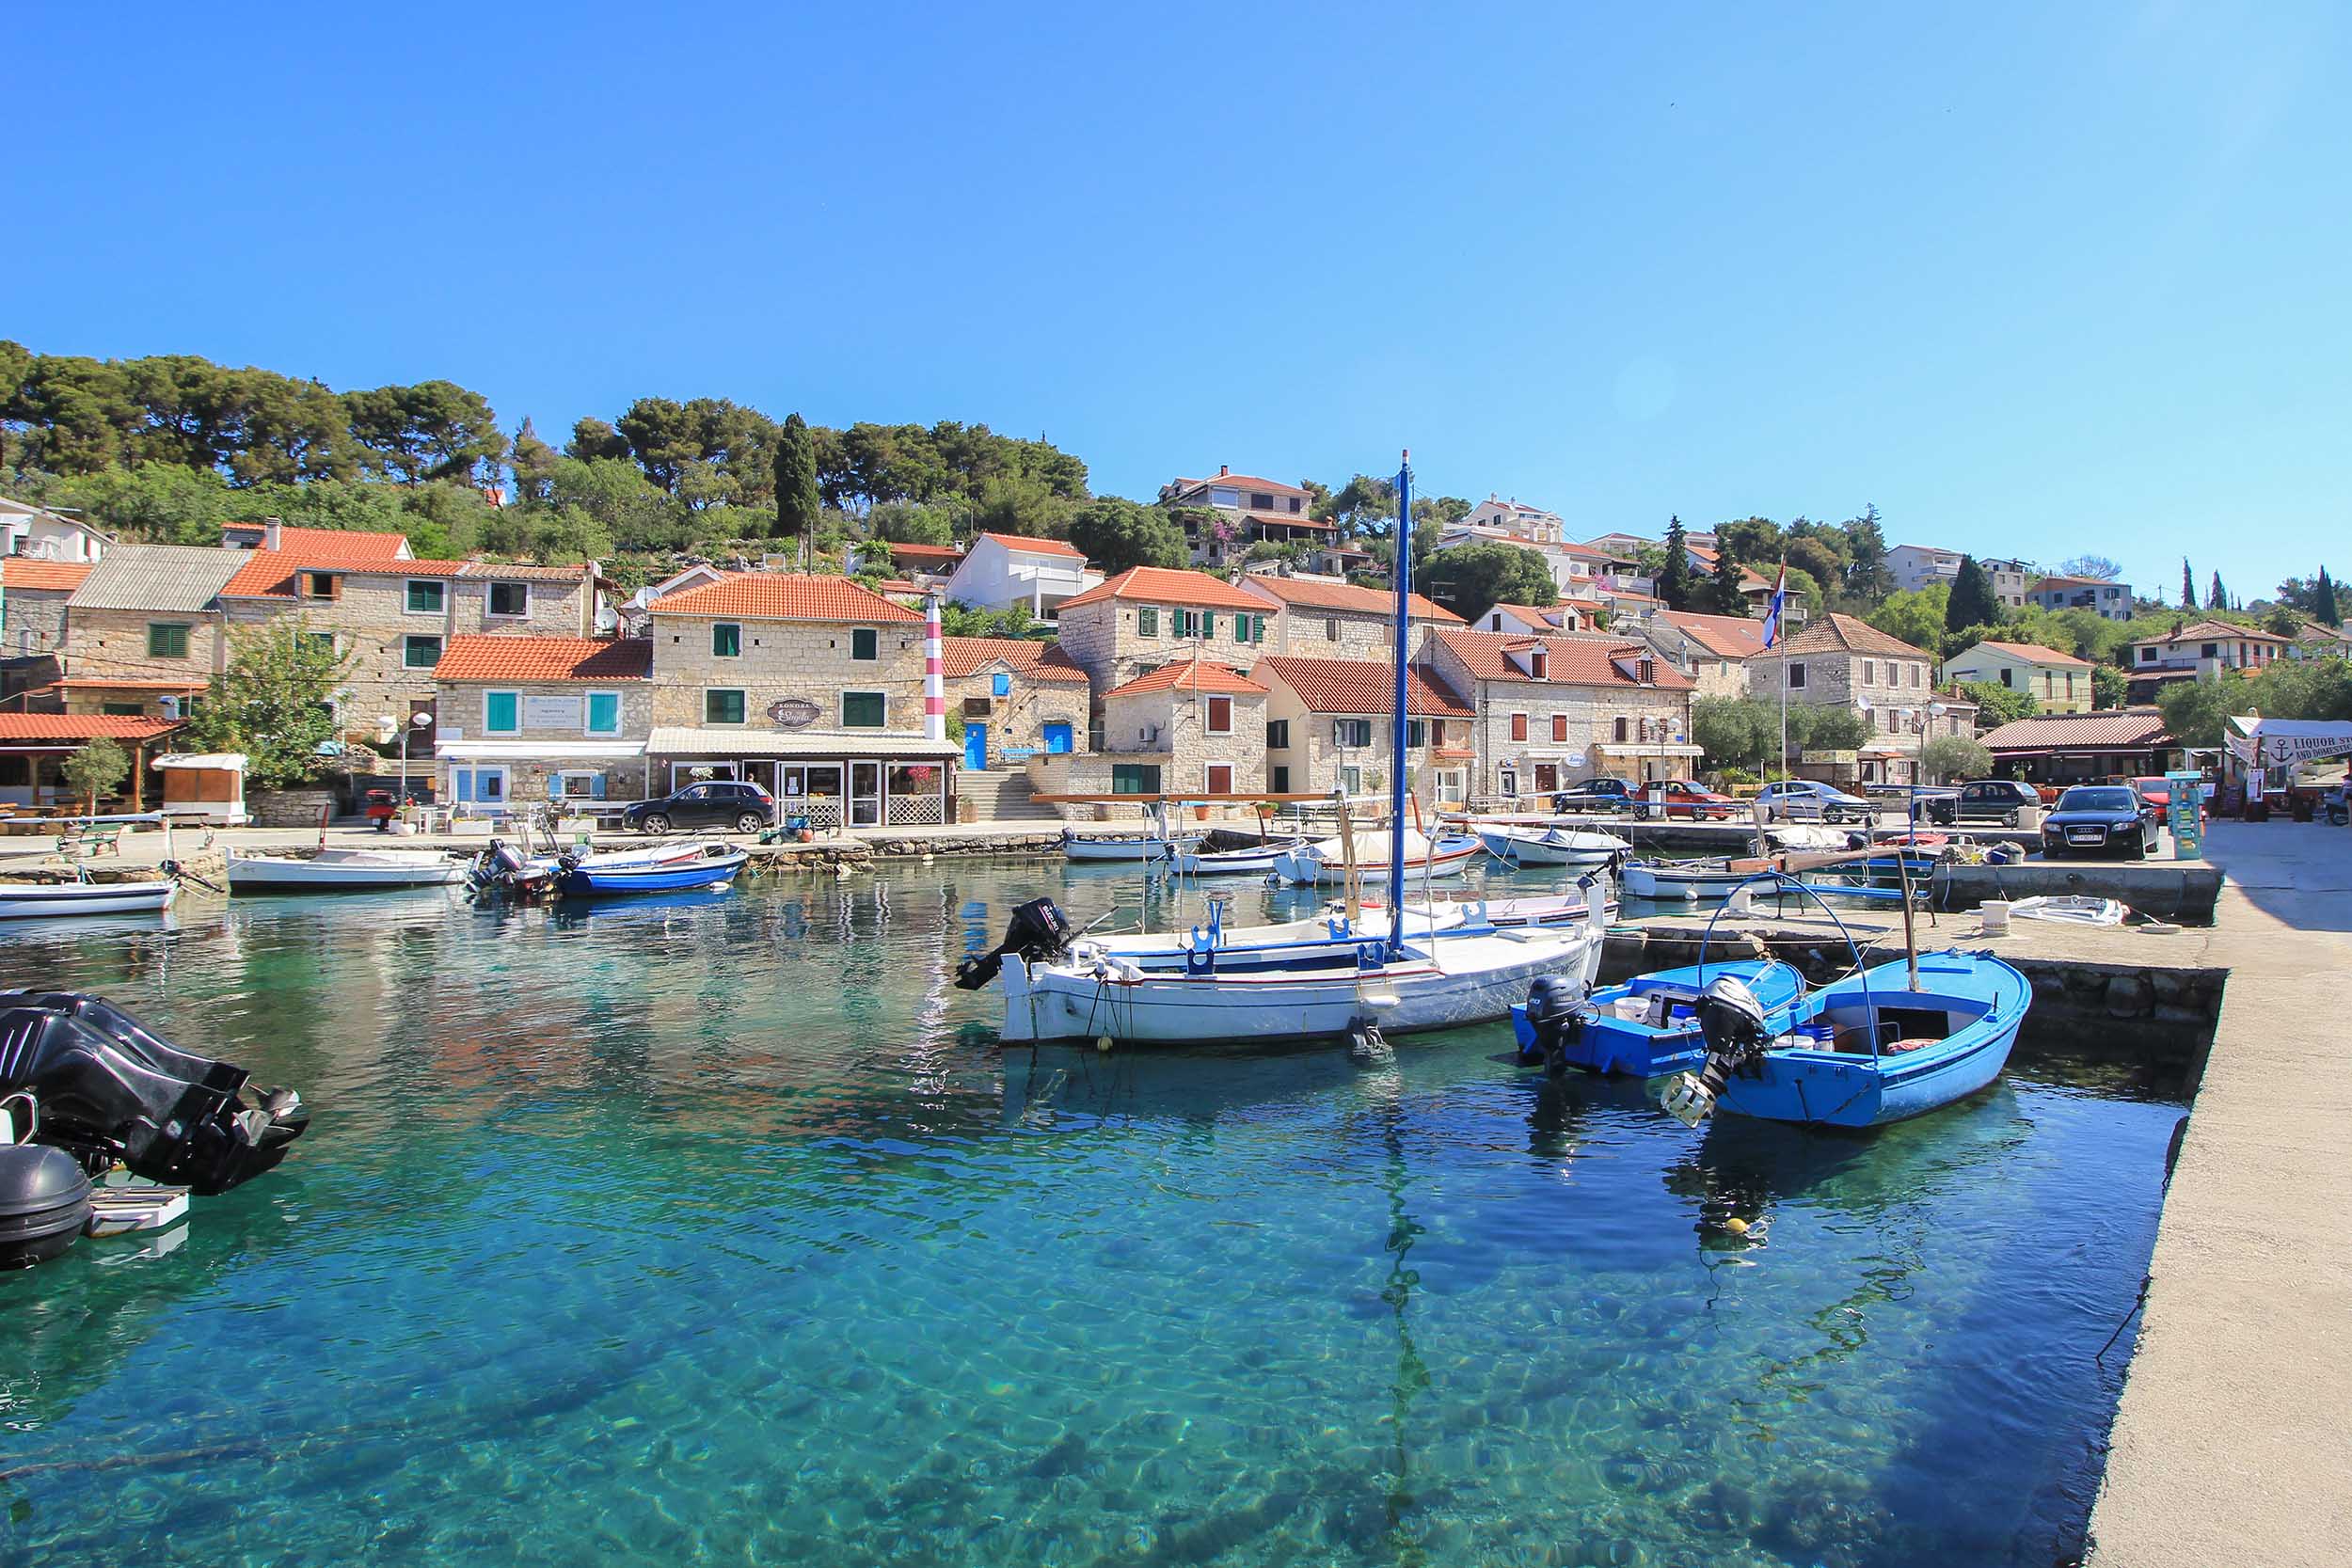 image credit to placesofjuma. Image of Solta Island harbour with boats, houses and water with blue sky behind